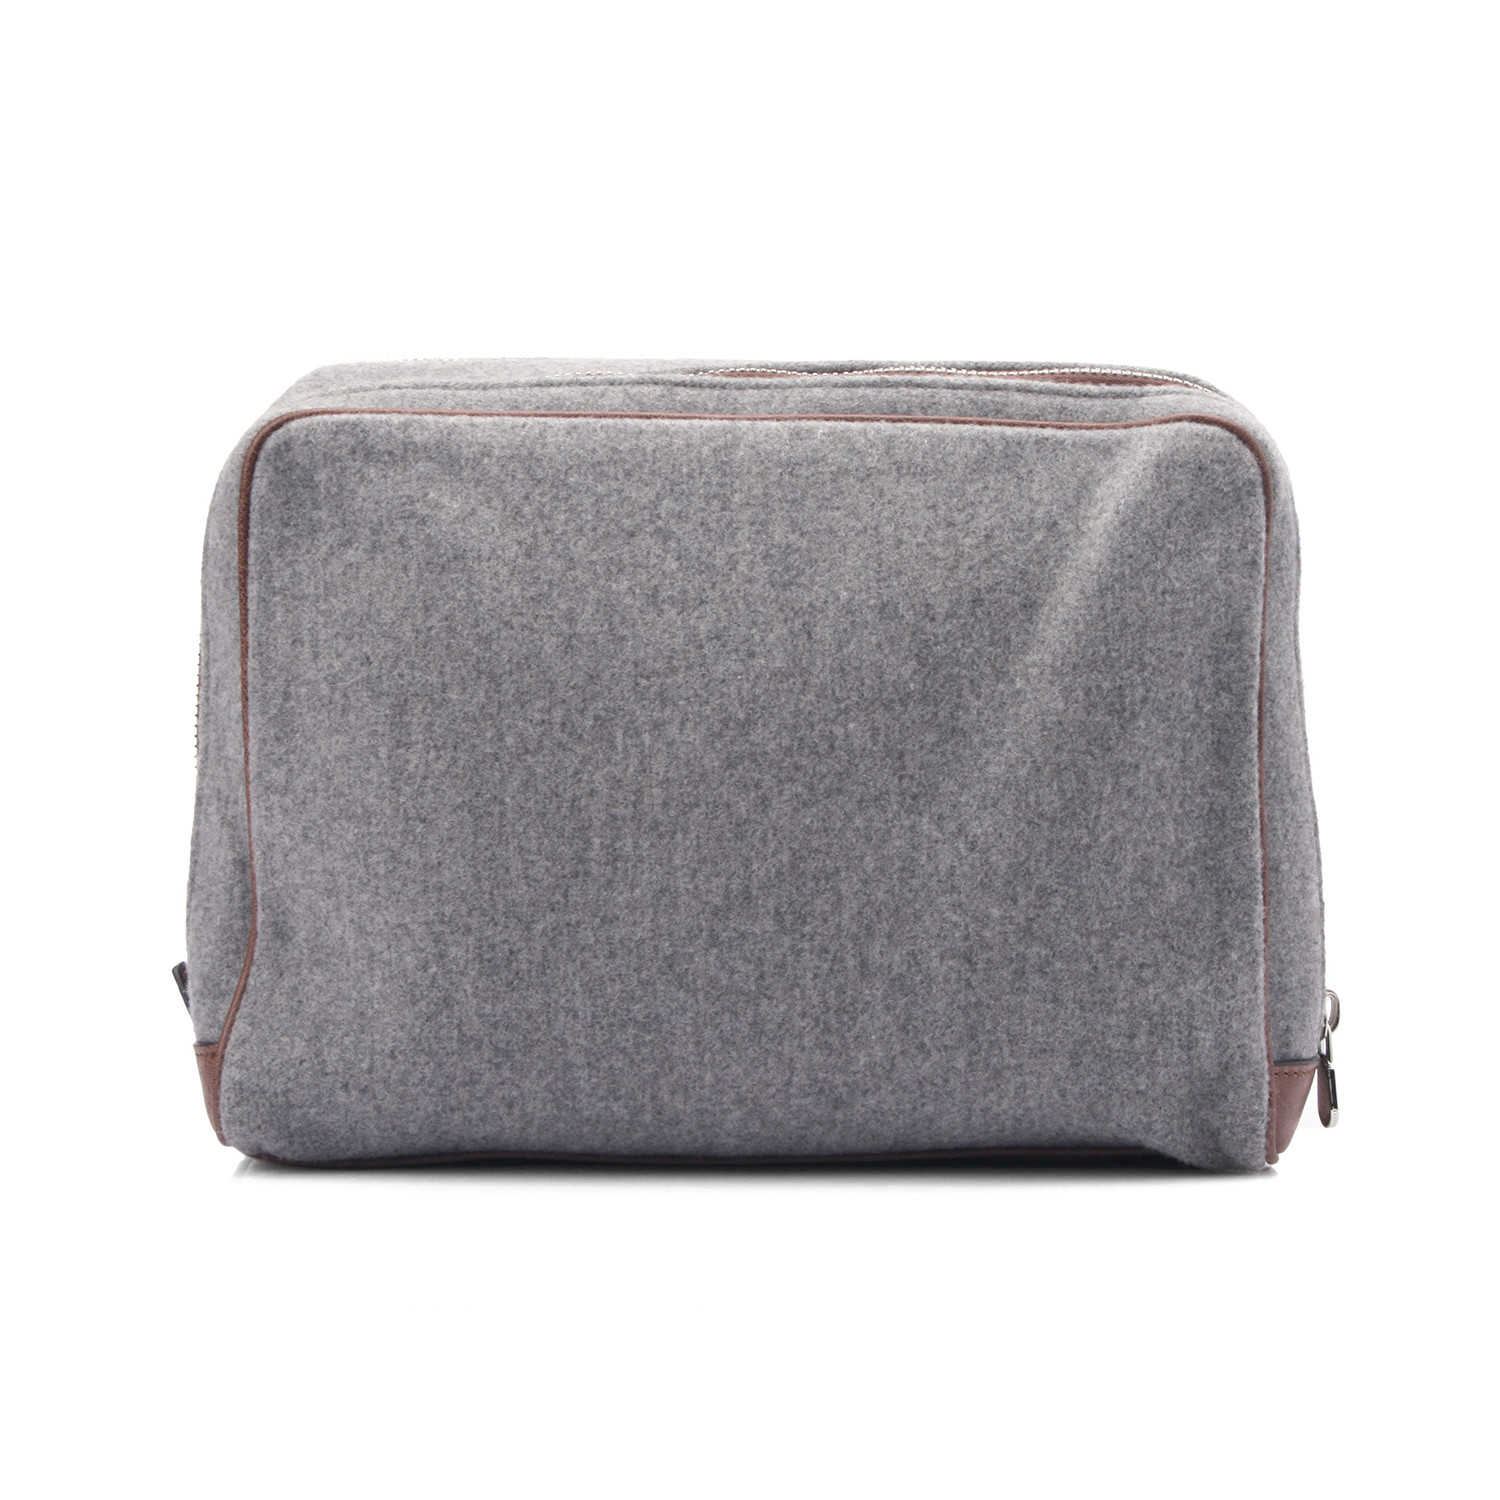 Personal Care Bag // Gray + Brown - Brunello Cucinelli - Touch of Modern